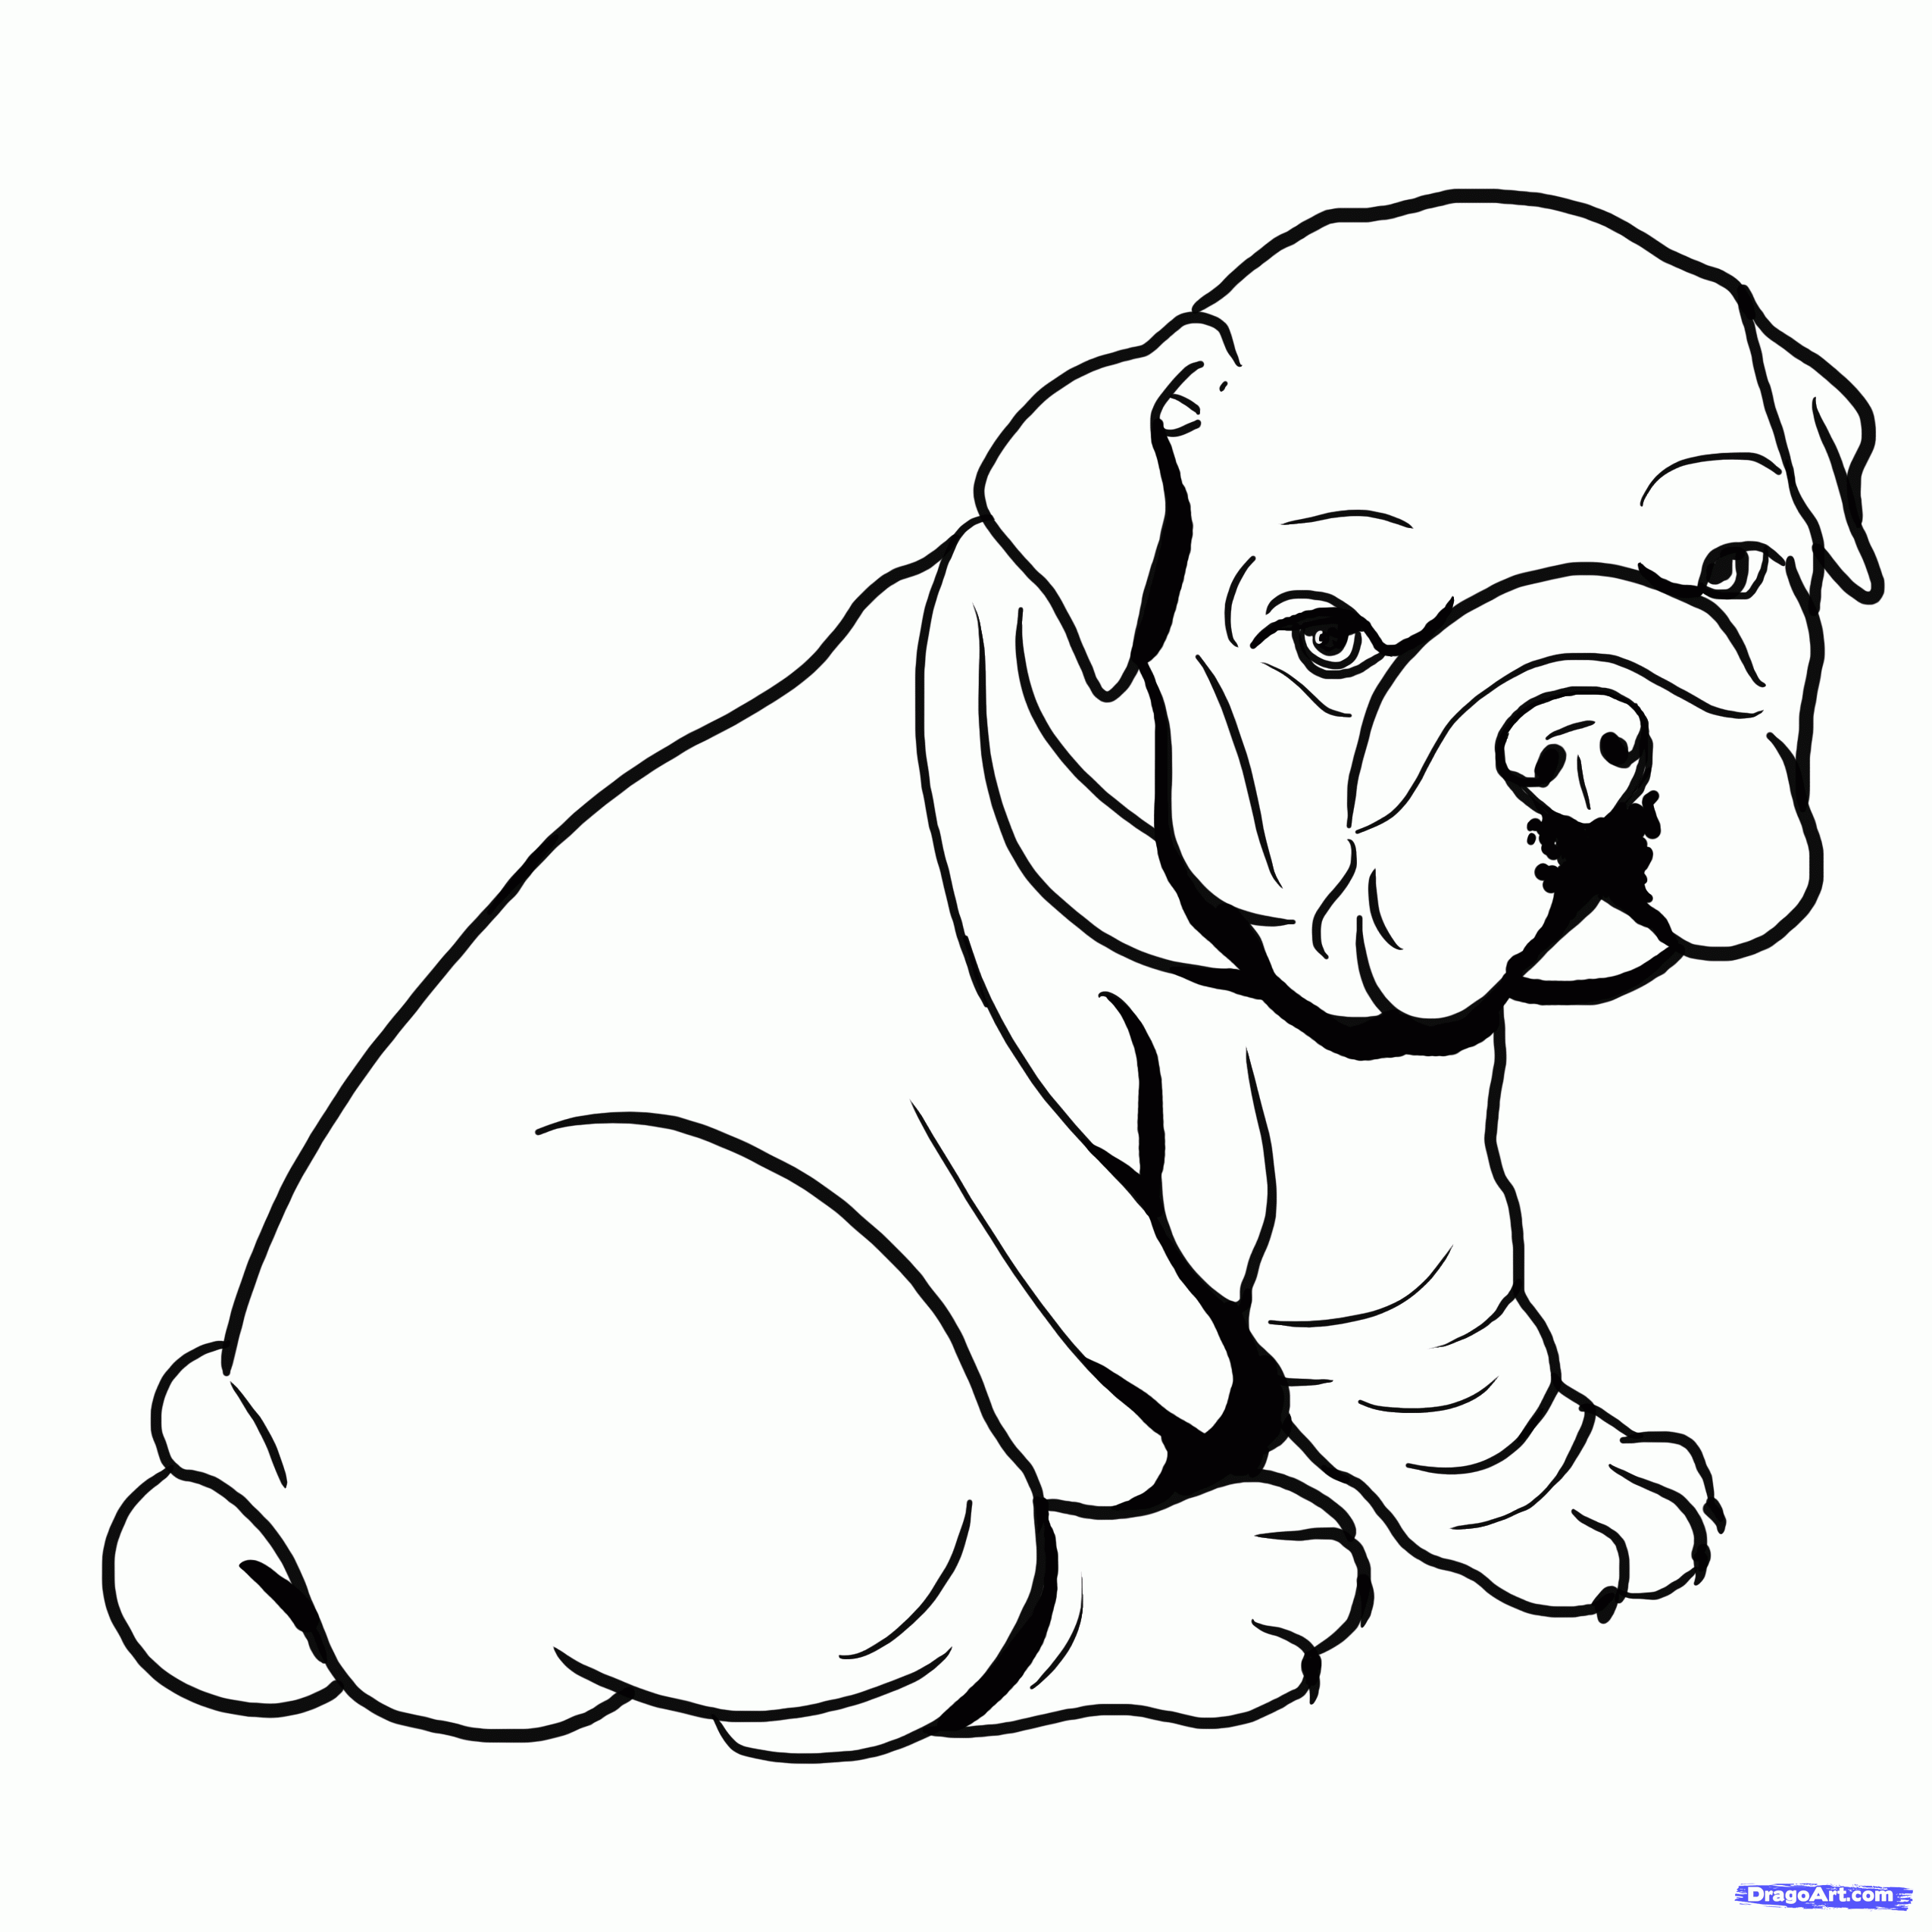 Download English Bulldog Coloring Pages For Kids And For Adults Coloring Home